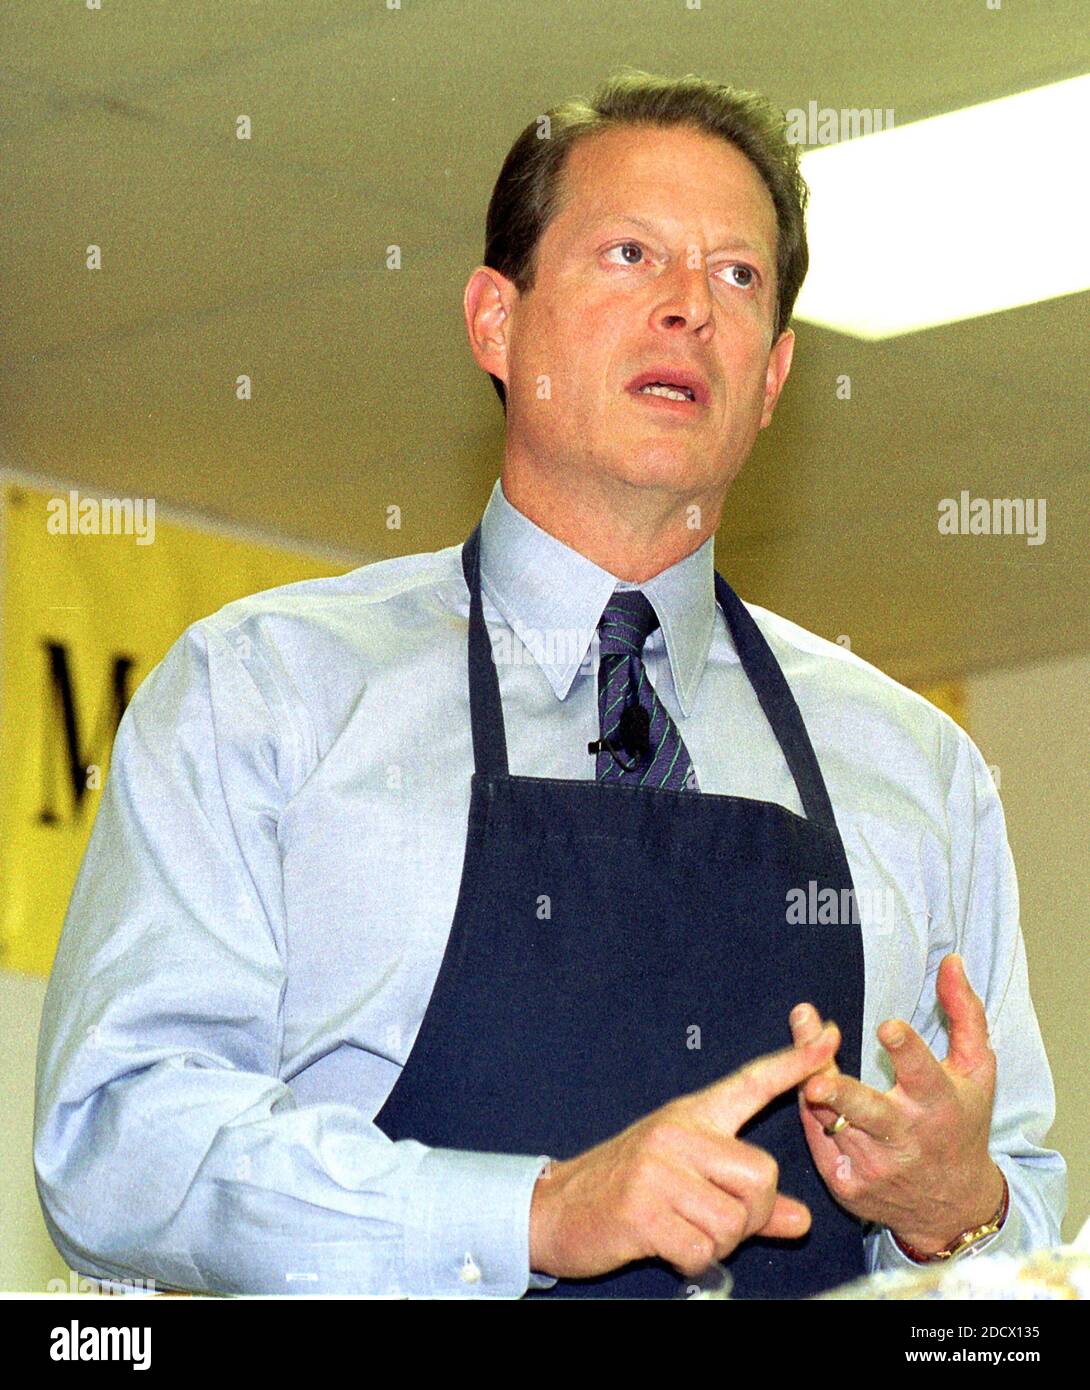 United States Vice President Al Gore proposes several initiatives to help working parents feed their families during a visit to Martha's Table in Washington, DC on 15 October, 1999.Credit: Ron Sachs / CNP/ABACAPRESS.COM Stock Photo